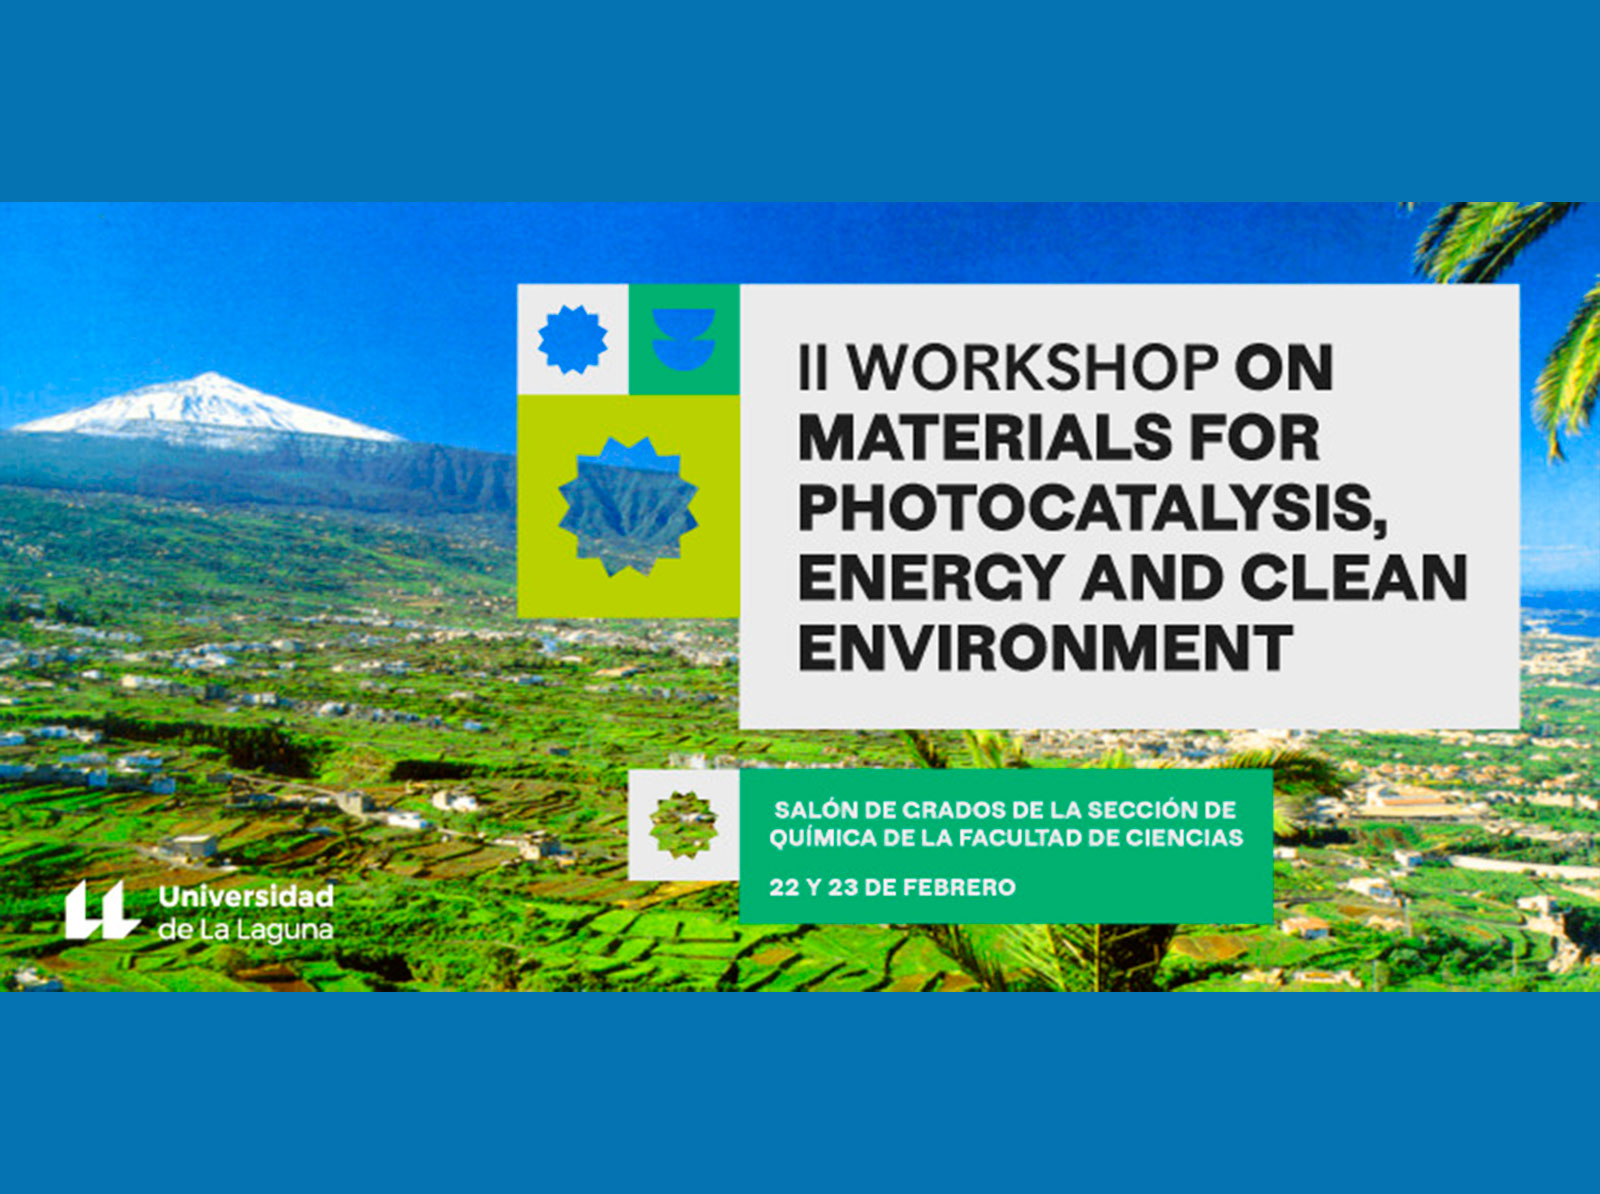 II Workshop on Materials for Photocatalysis, Energy and Clean Environment